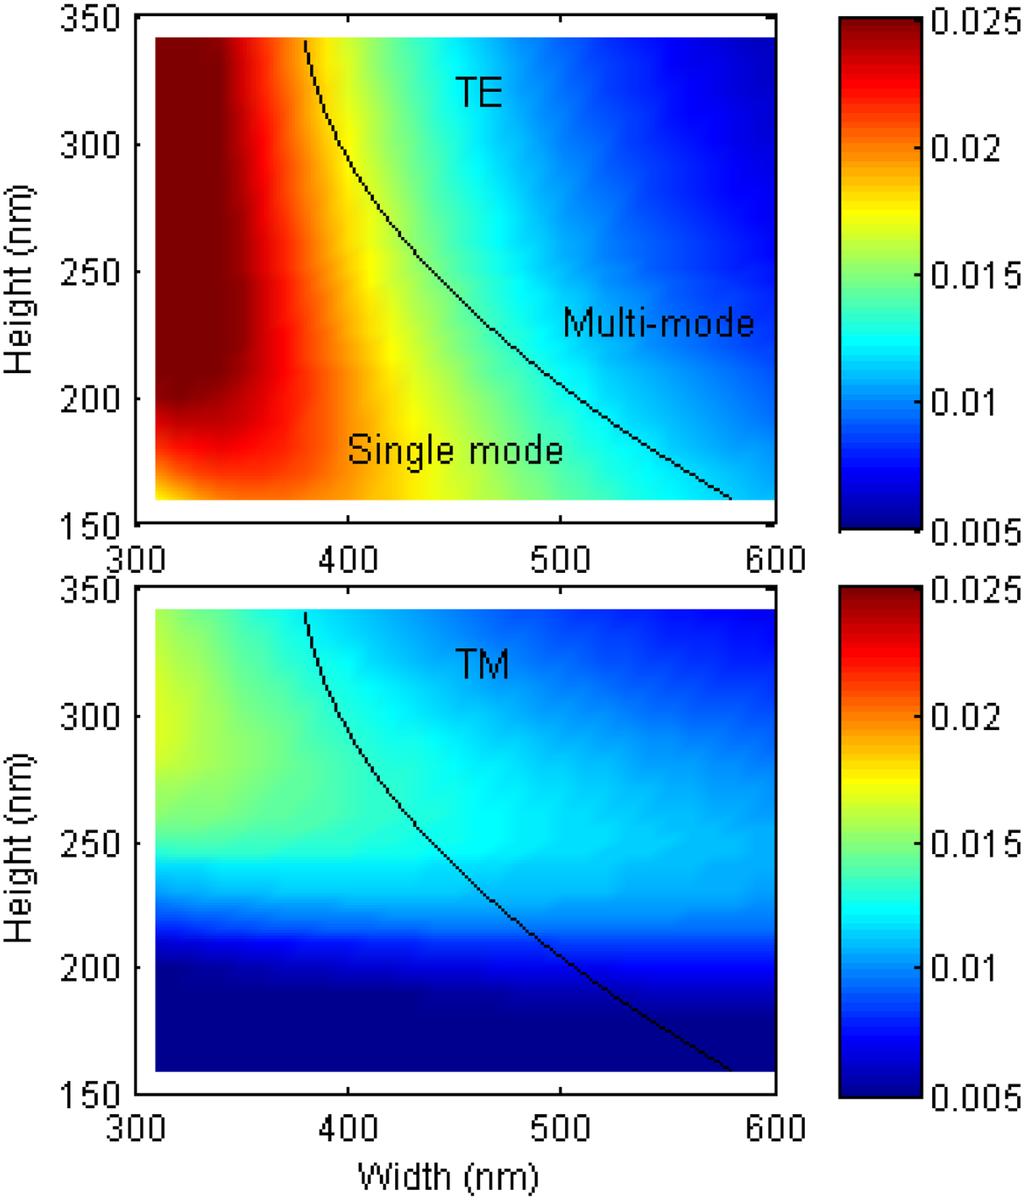 Figure 8. Map of waveguide effective index changes caused by 5 nm deviation in width and 1 nm deviation in height as a function of waveguide height and width.